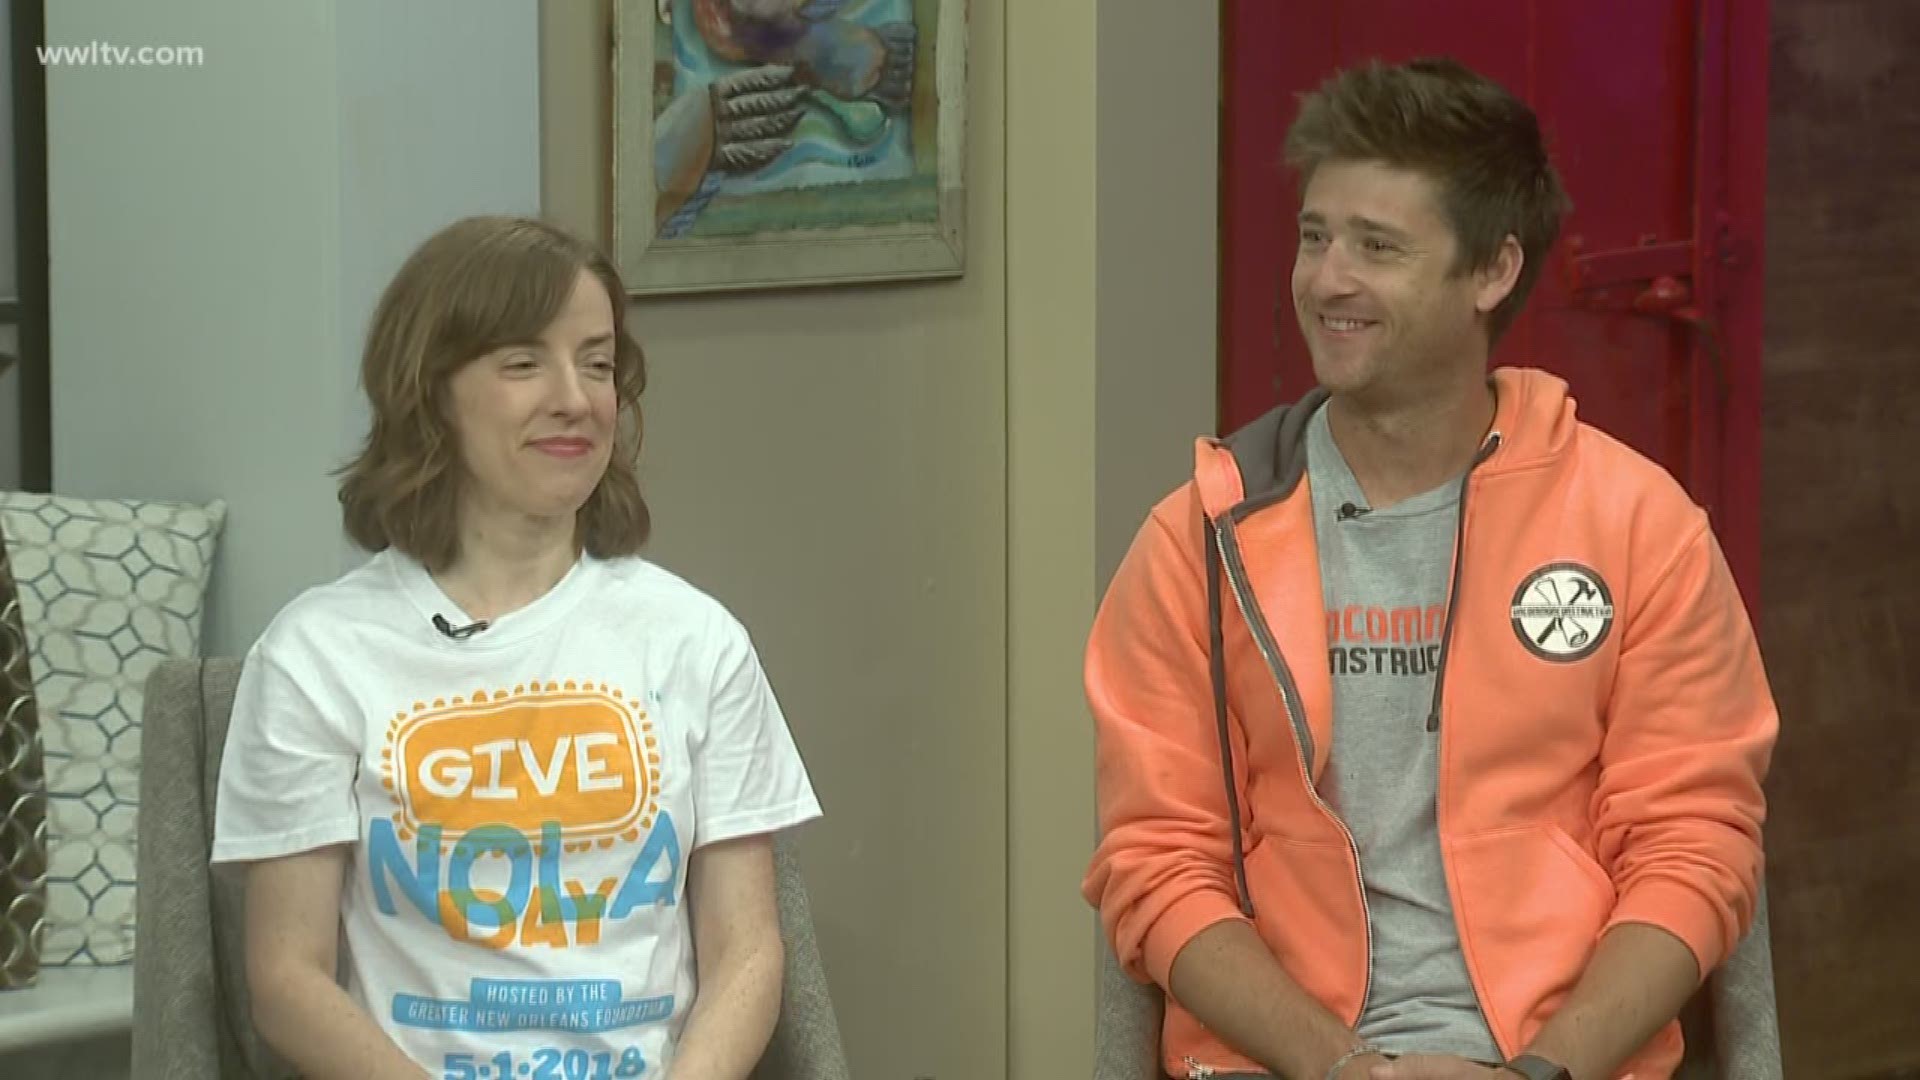 Host of Give Nola, Erin Mcquade Wright from the Greater New Orleans Foundation and participant Aaron Frumin with Uncommon Construction, talks about the success of Give NOLA Day.